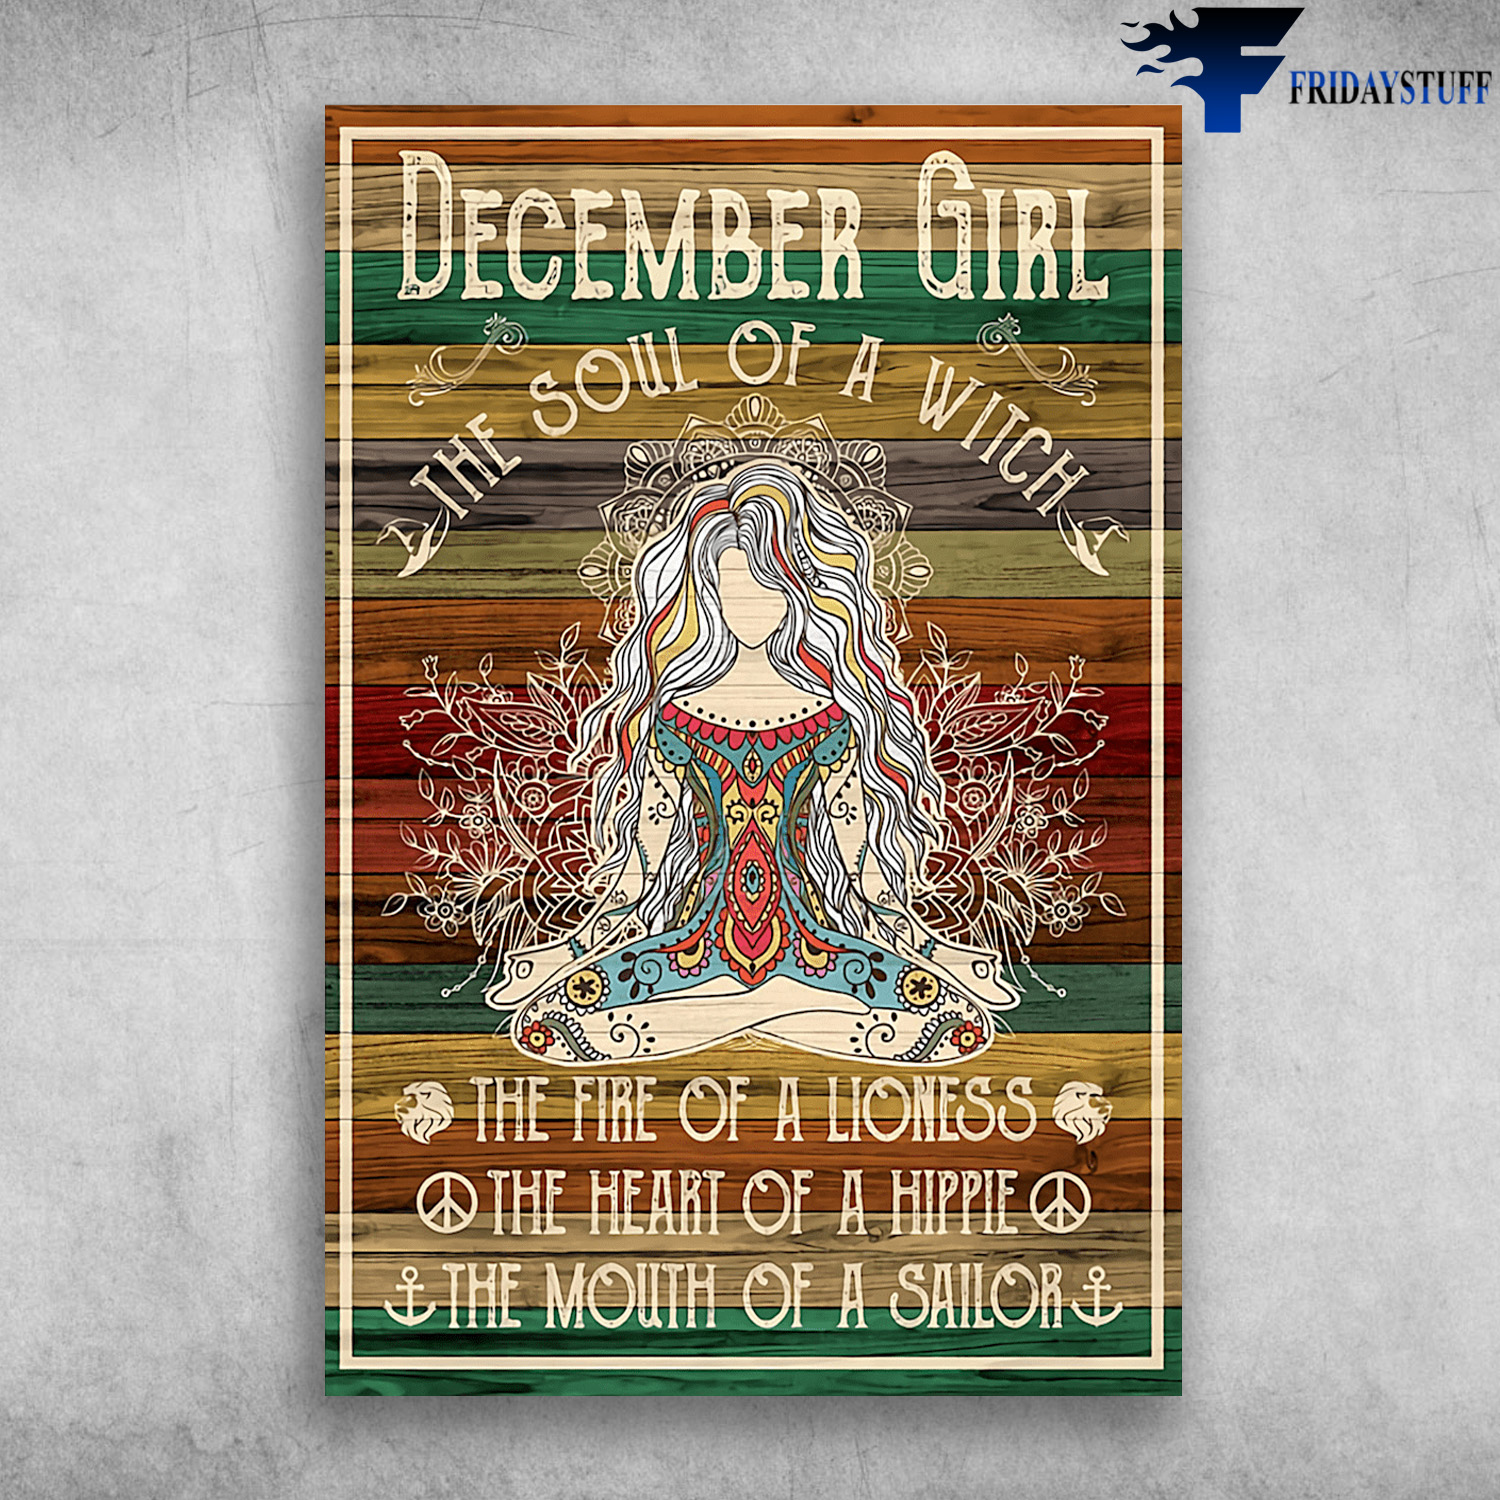 Girl Love Yoga - December Girl, The Soul Of A Witch, The Fire Of A Lioness, The Heart Of A Hippie